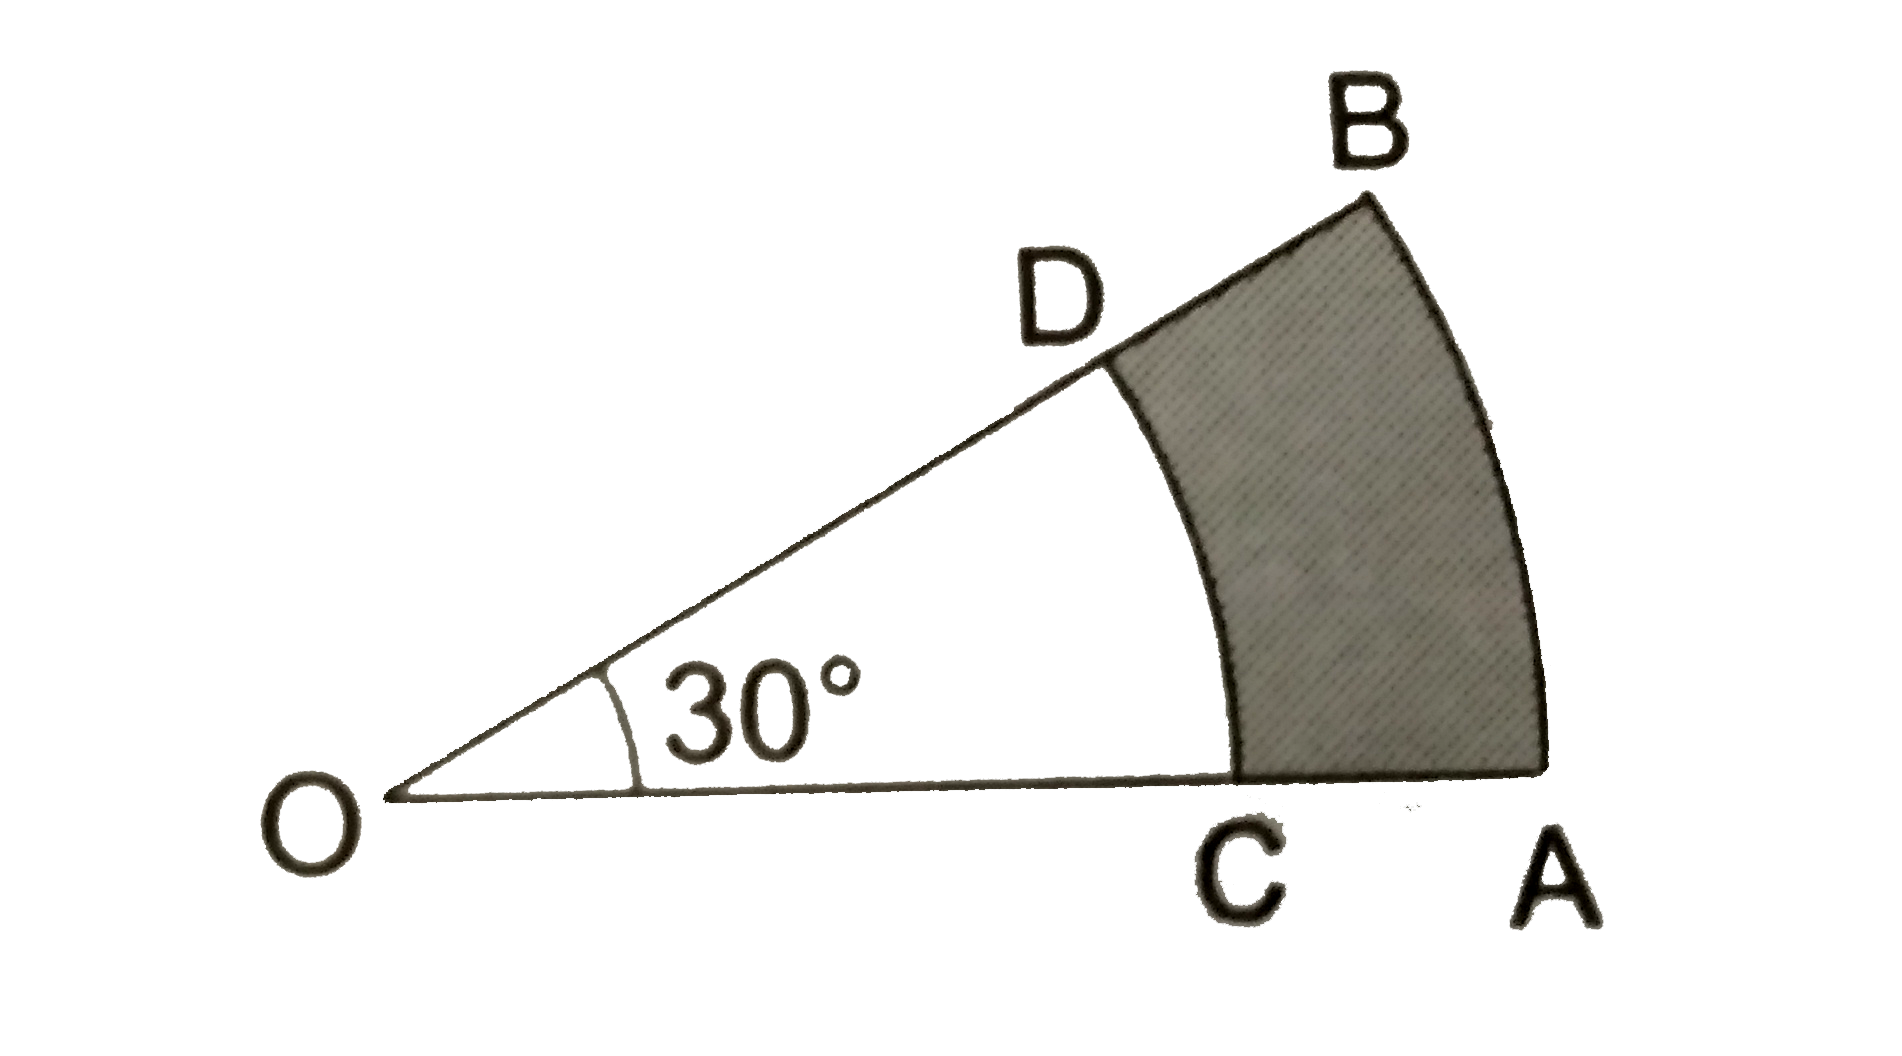 In the give figure, the sectors of two concentric circles of radii 7 cm and 3.5 cm are shown. Find the area of the shaded region.